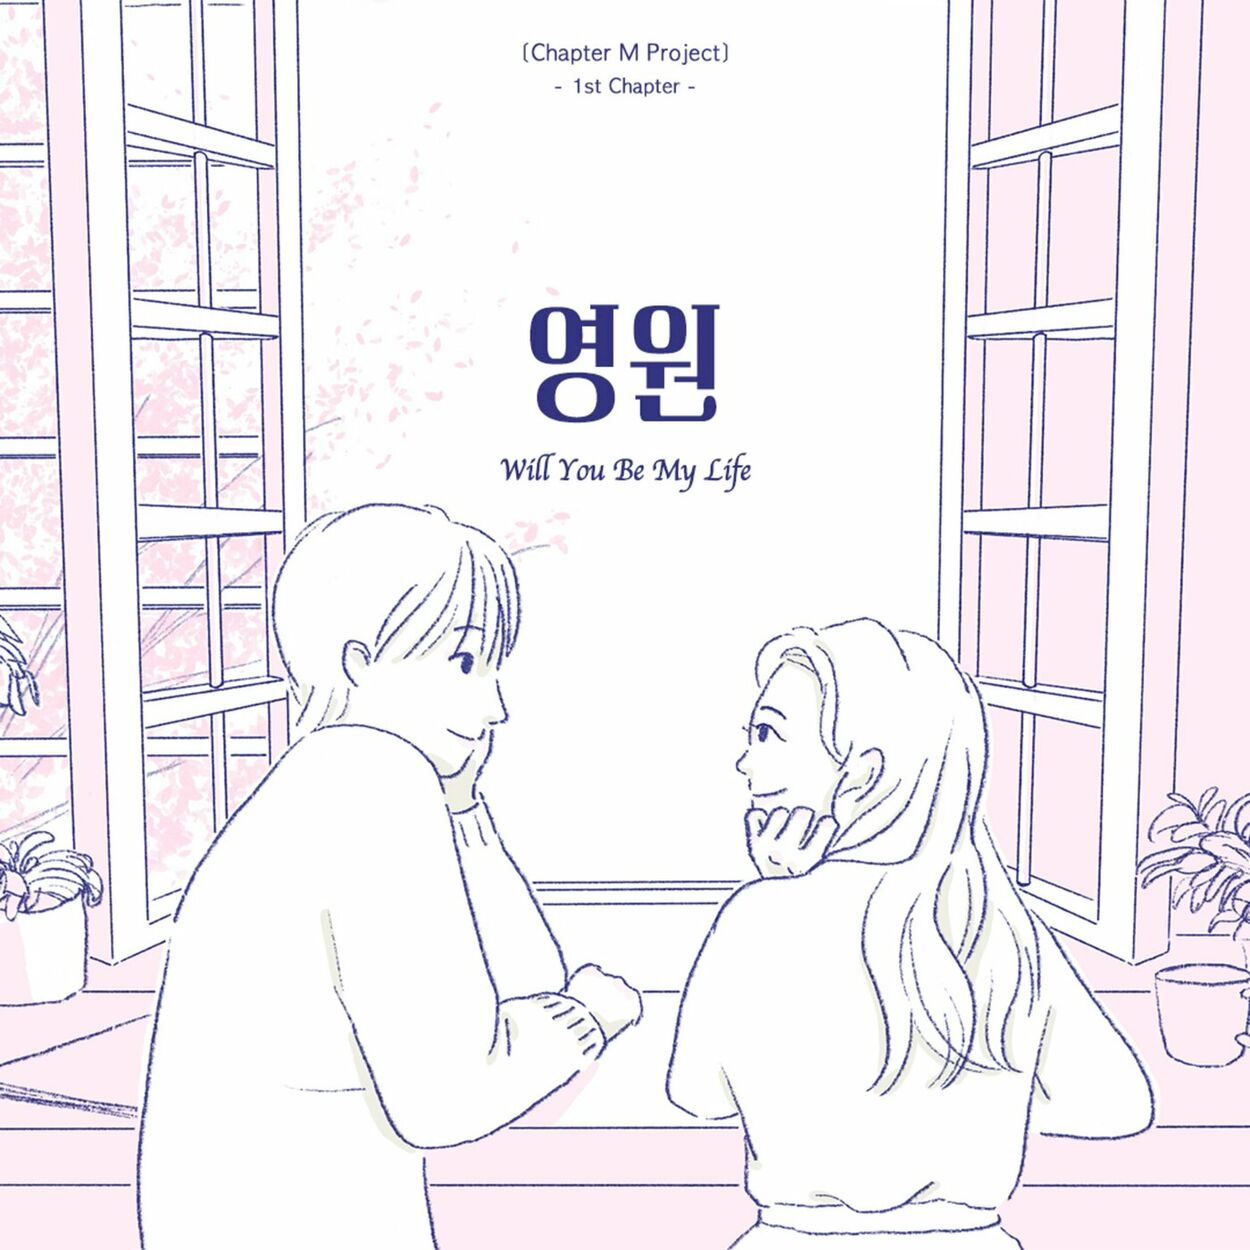 NIve – [Chapter M Project] 1st Chapter ‘Will You Be My Life’ – Single